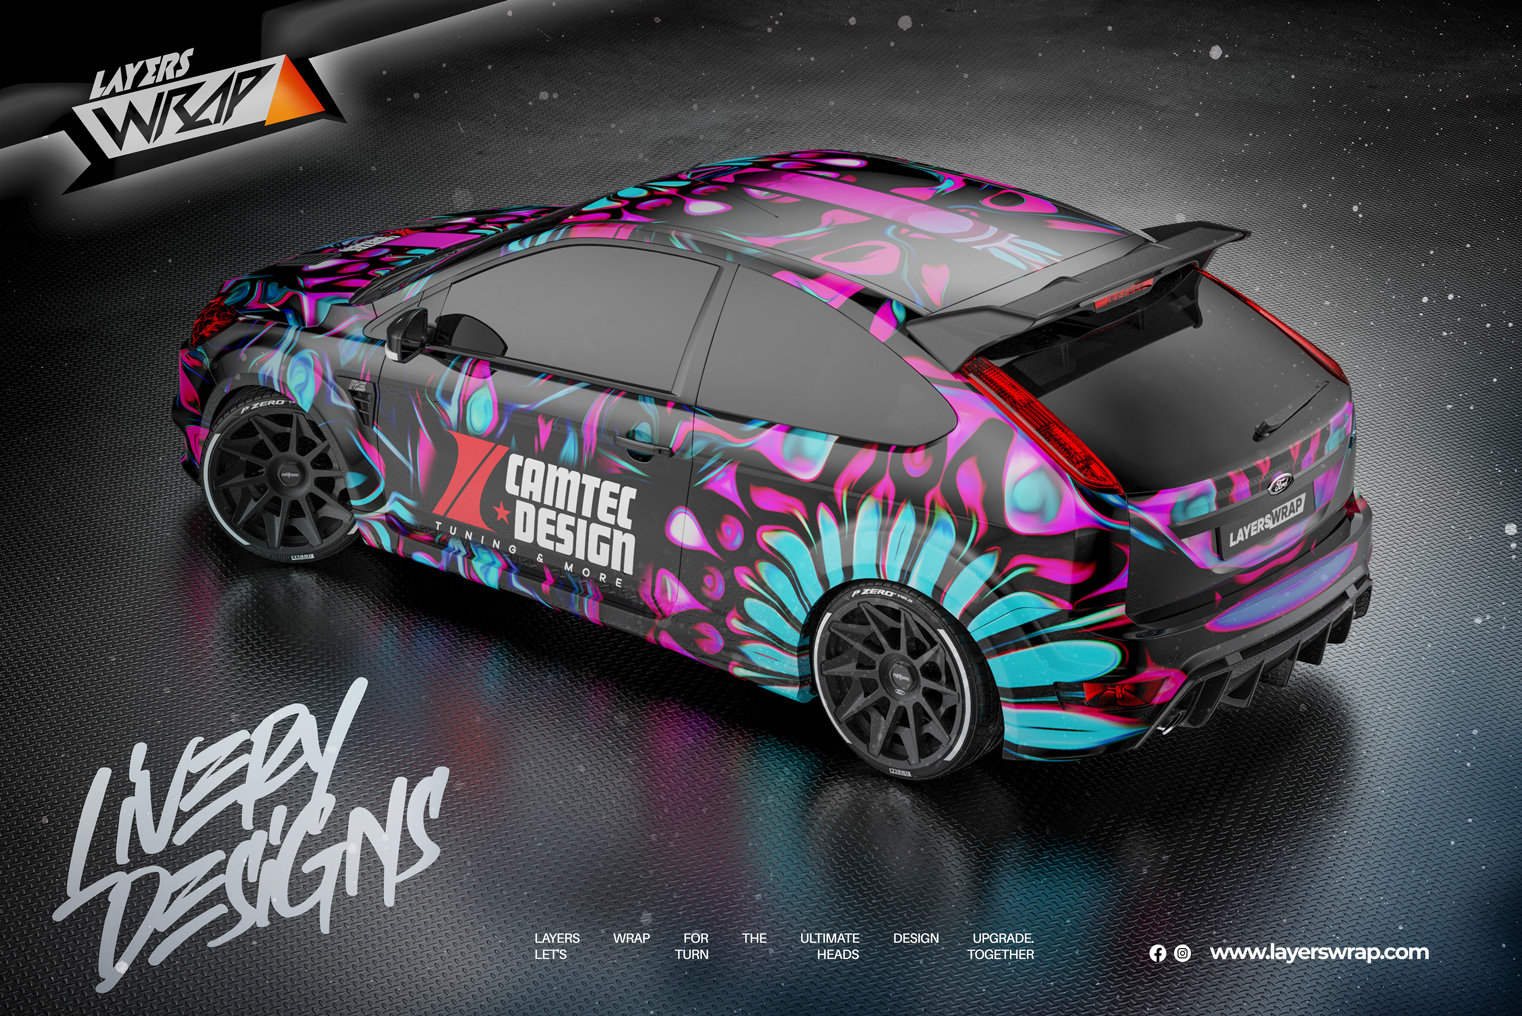 Revealing Exclusive One-of-a-Kind Artwork Designs on Ford Focus for Camtec Design | Layers Wrap